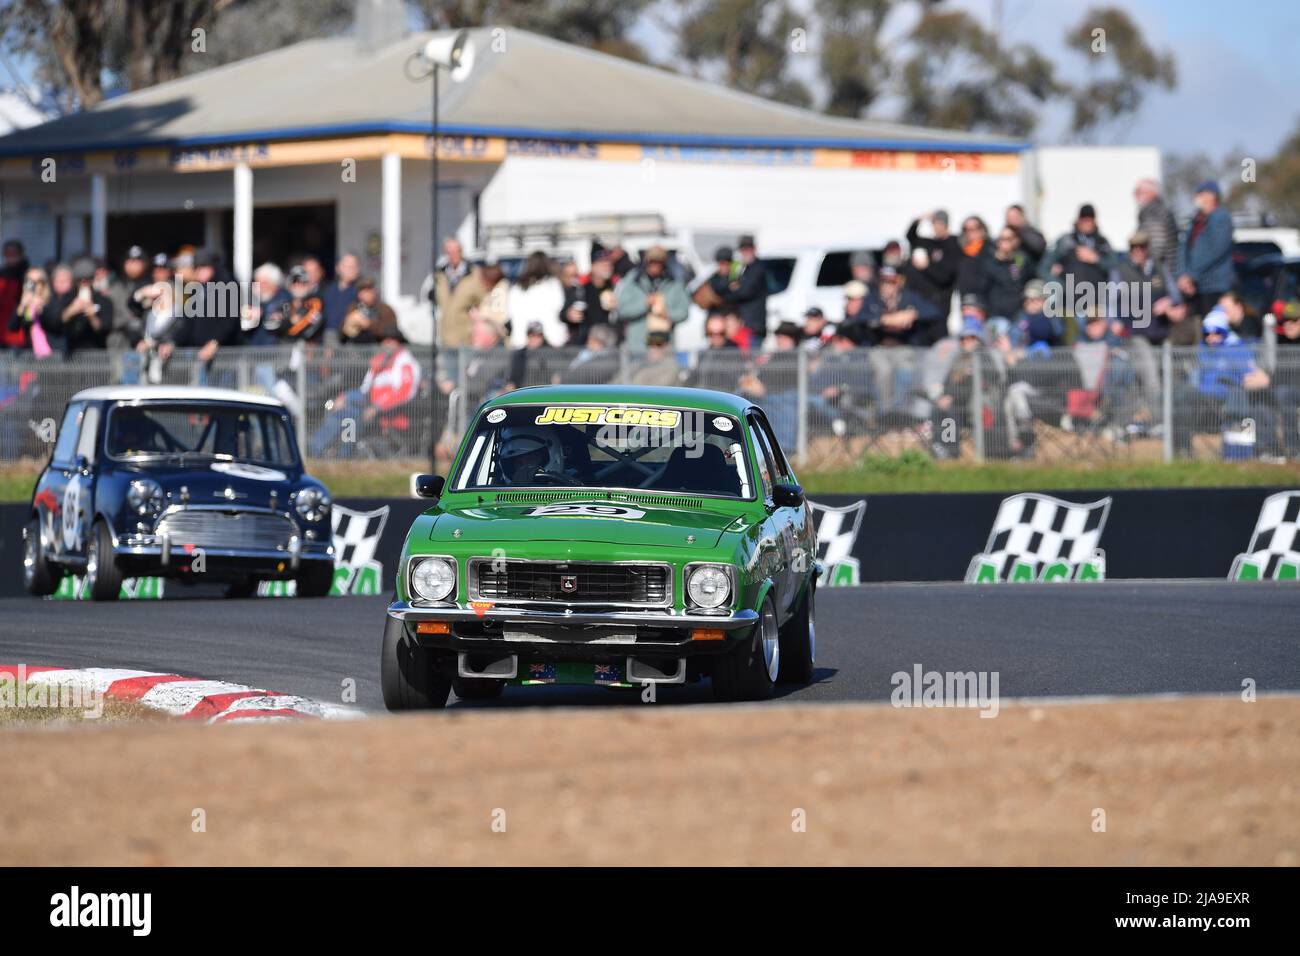 Winton, Australia. 29 May, 2022.  Andrew Girvan's 1972 Holden GTR takes turn 1 and the lead in the N Class race at Historic Winton. Historic Winton is Australia's largest and most popular all-historic motor race meeting. Credit: Karl Phillipson/Optikal/Alamy Live News Stock Photo